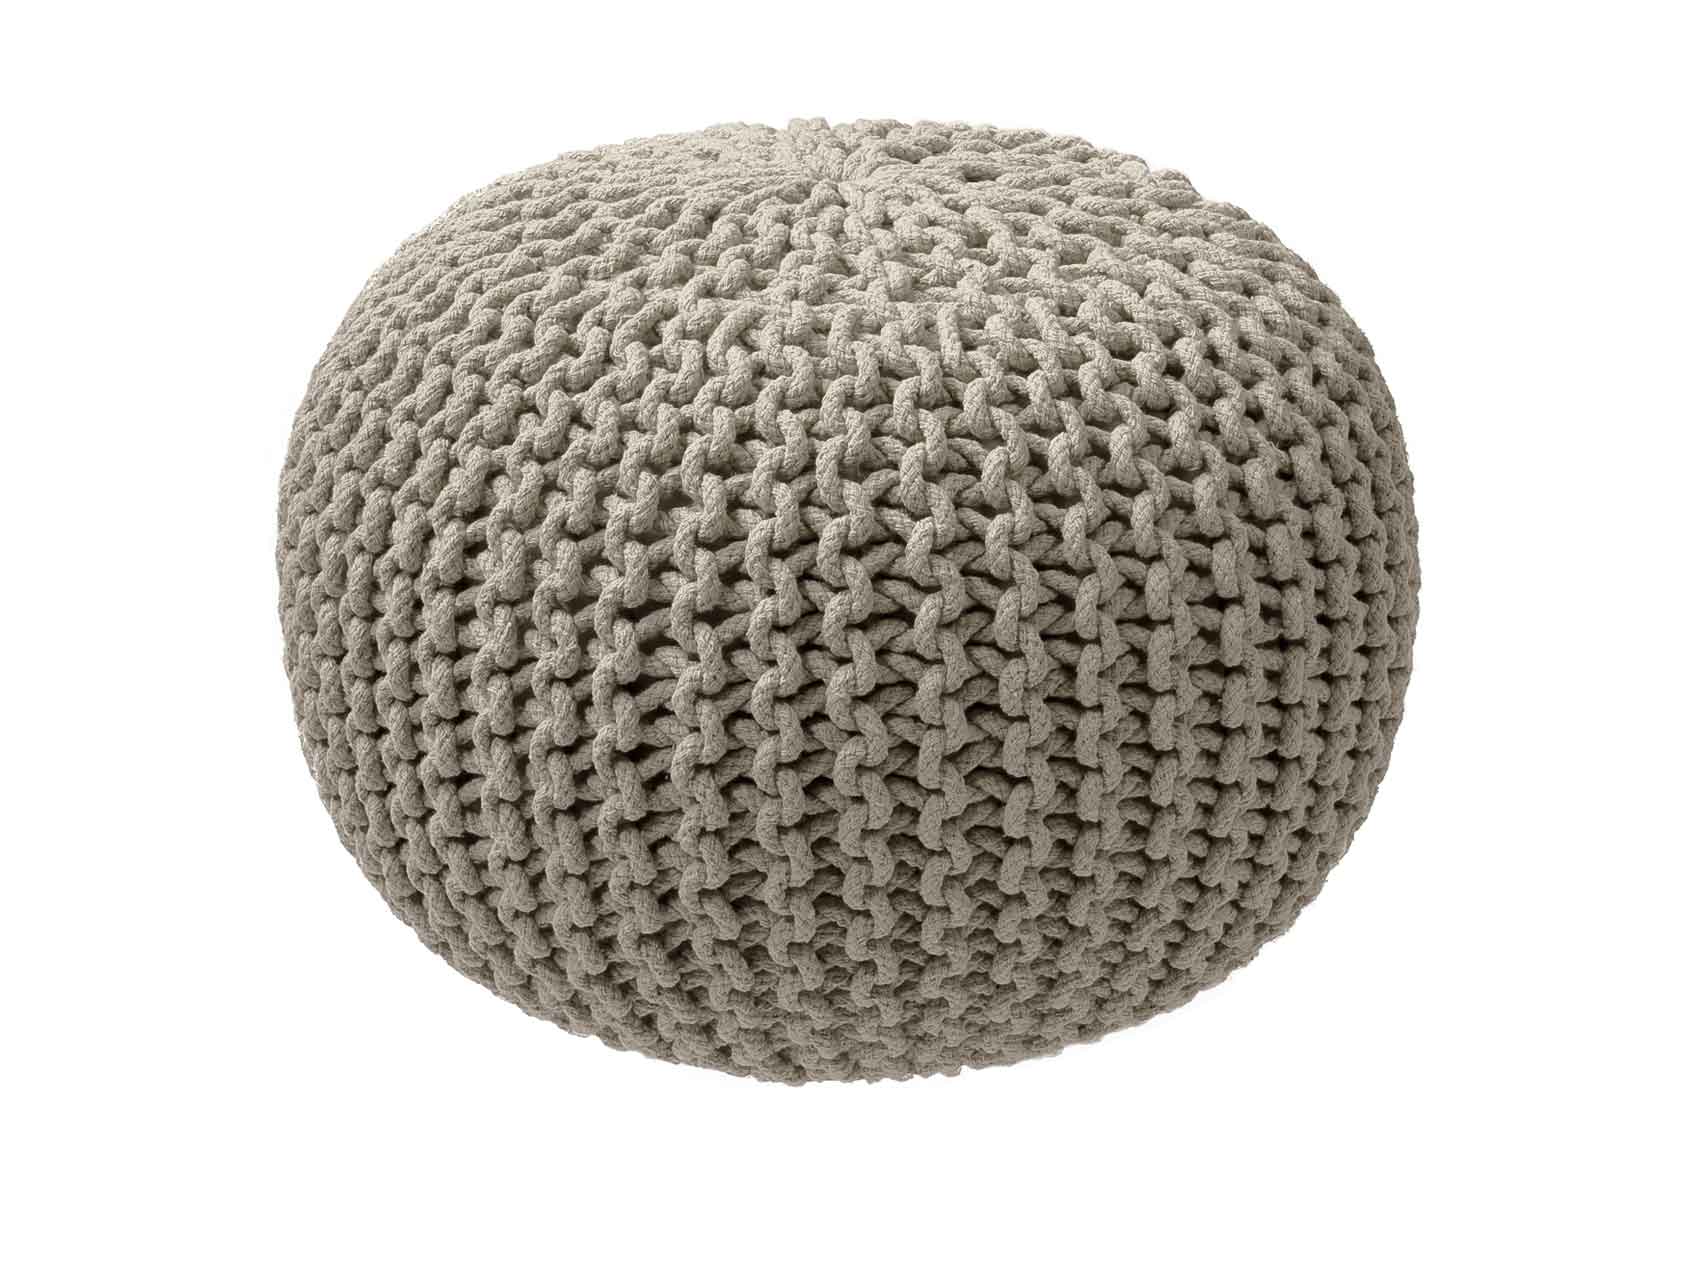 Knitted Pouf taupe